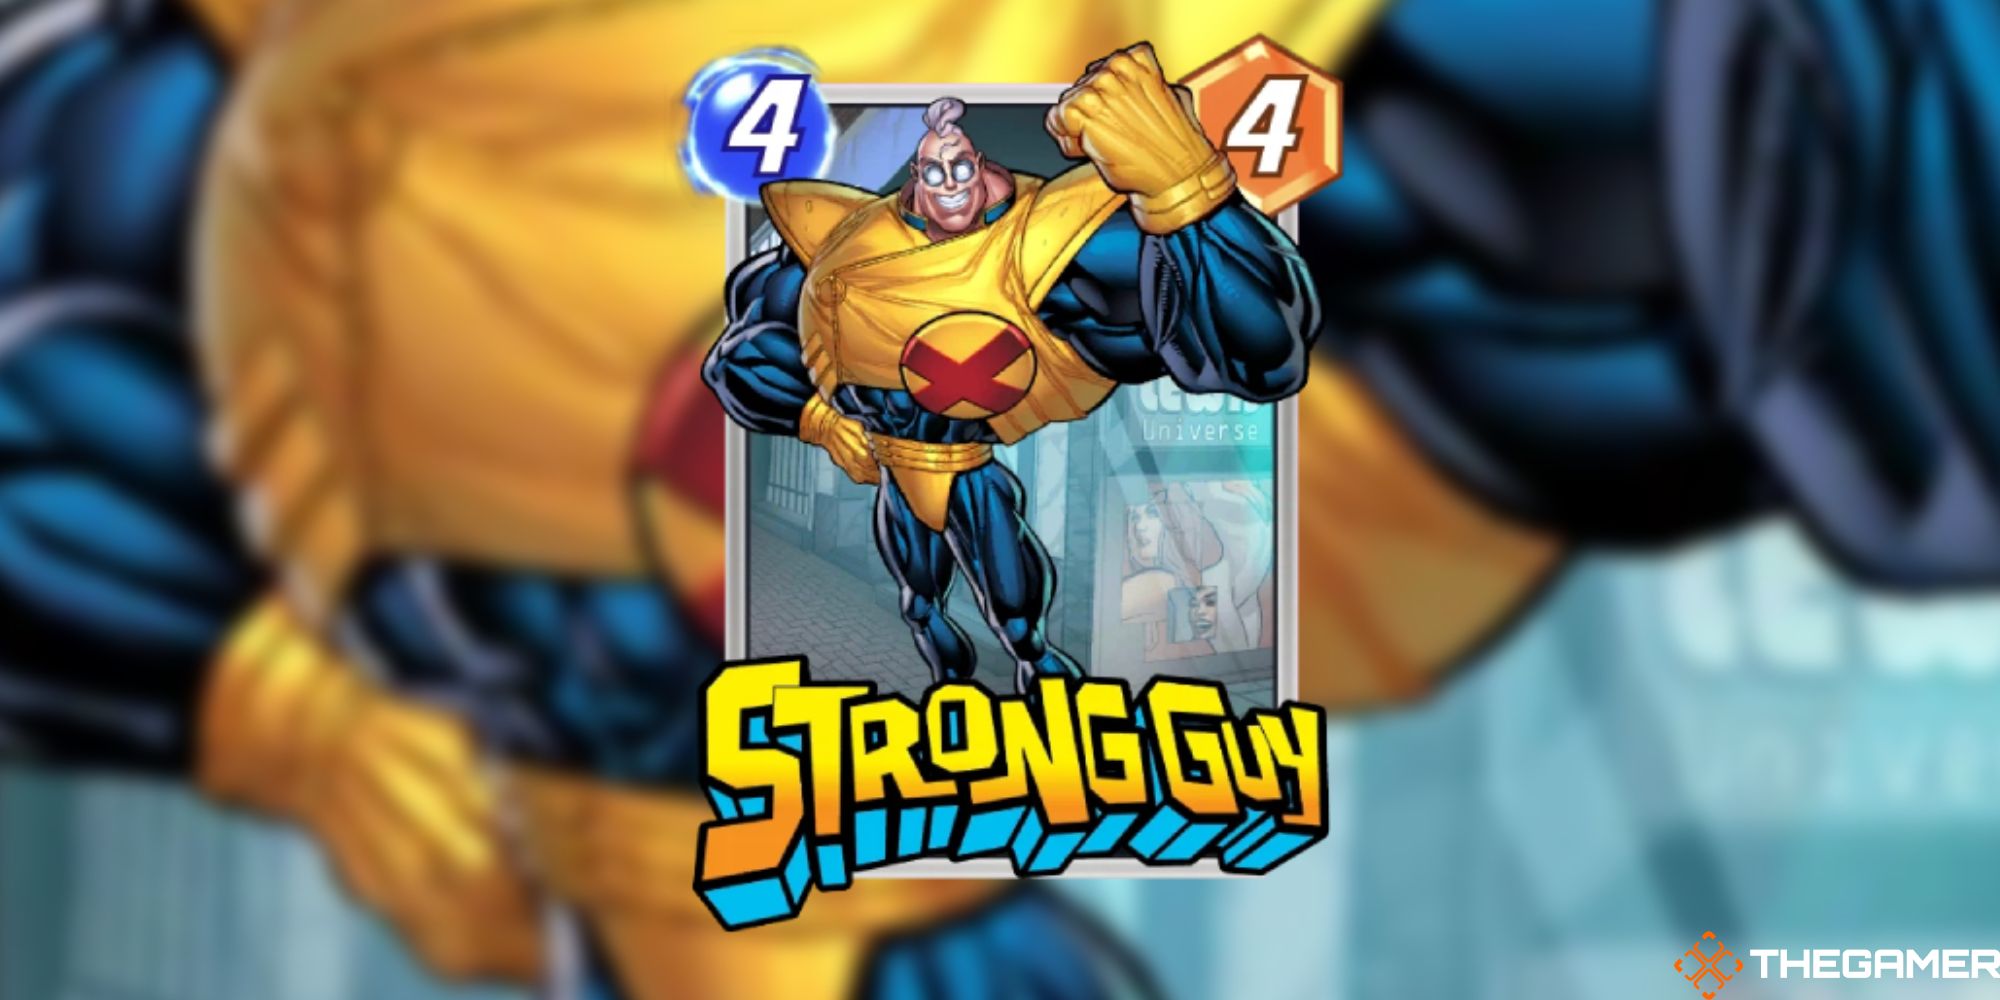 Card art of Strong Guy by Virgilio D'Ambrosio and Ryan Kinnaird from Marvel Snap